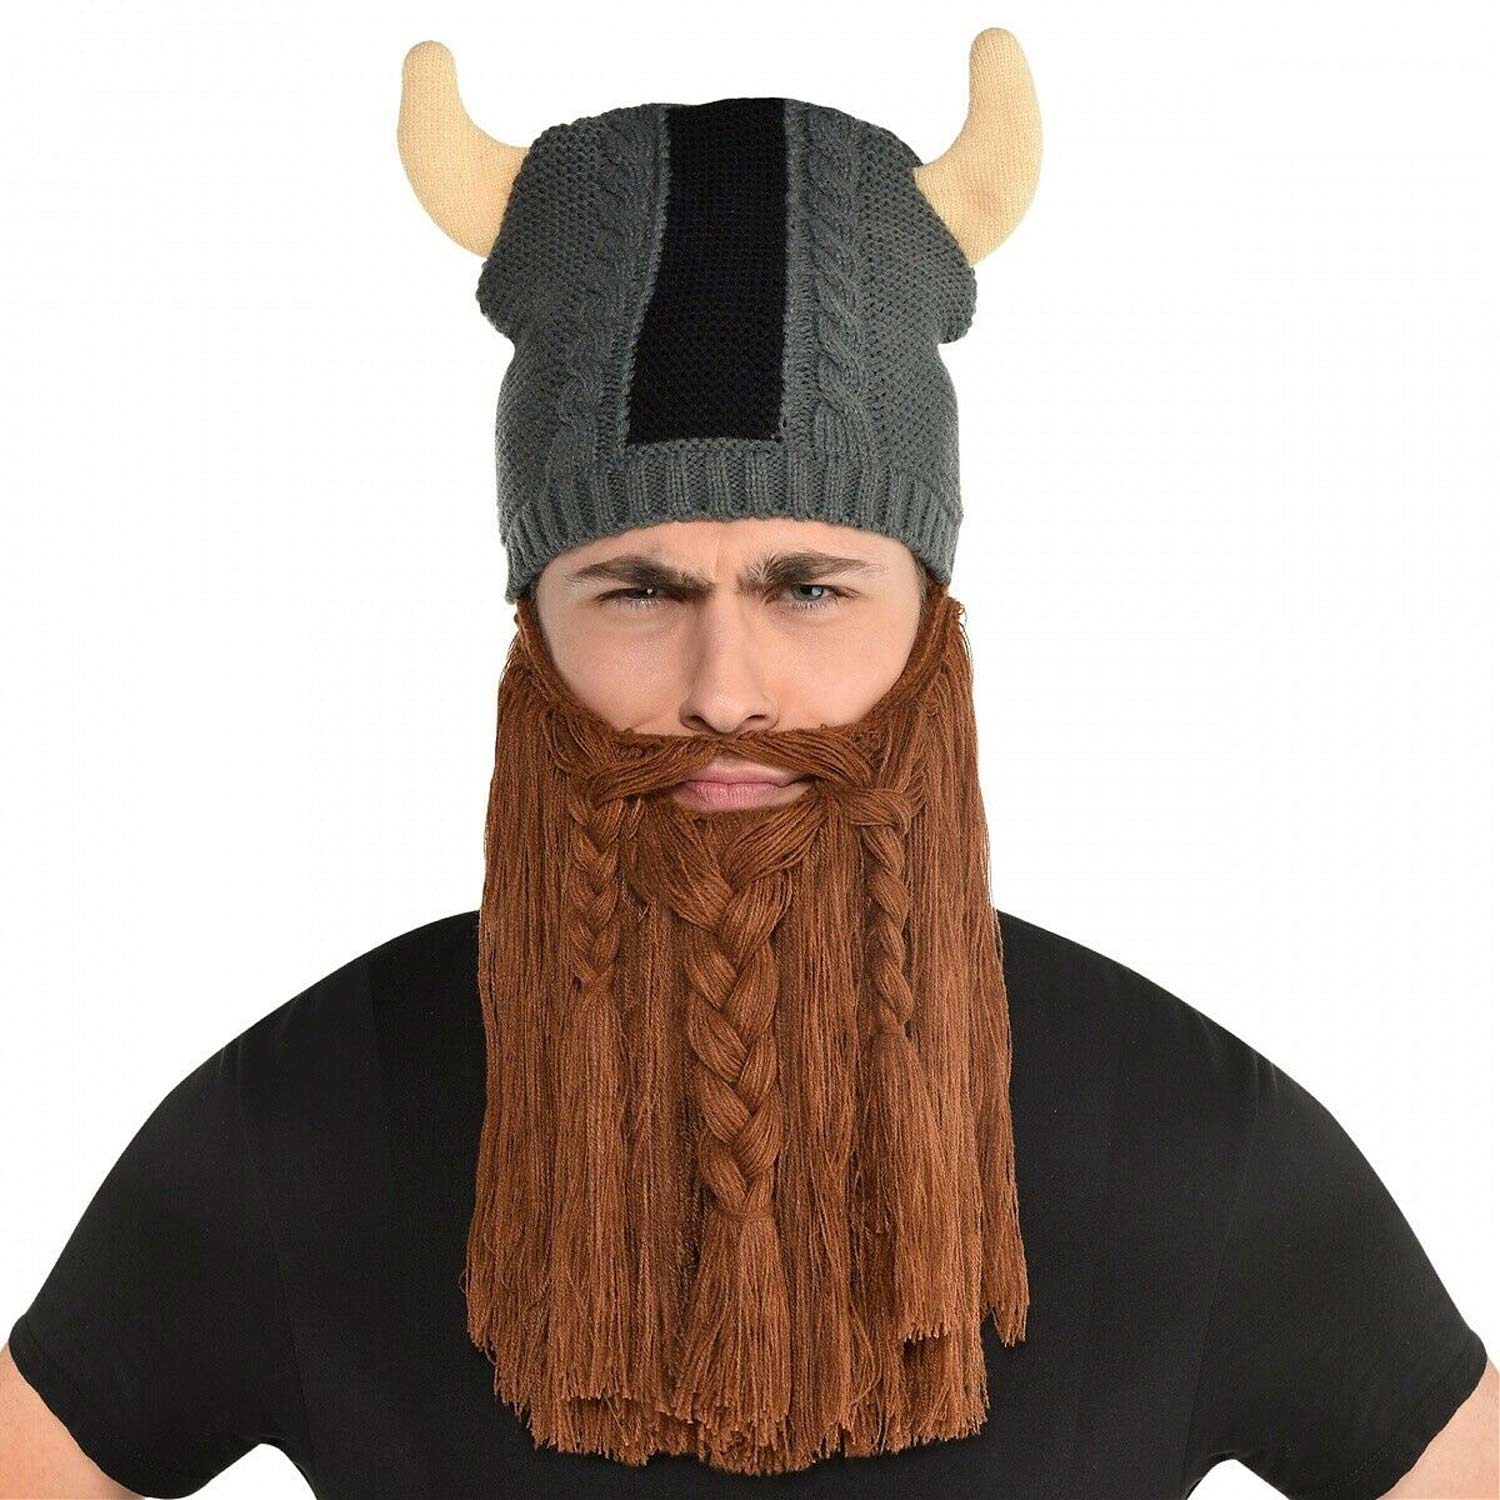 Adult Viking Hat With Beard